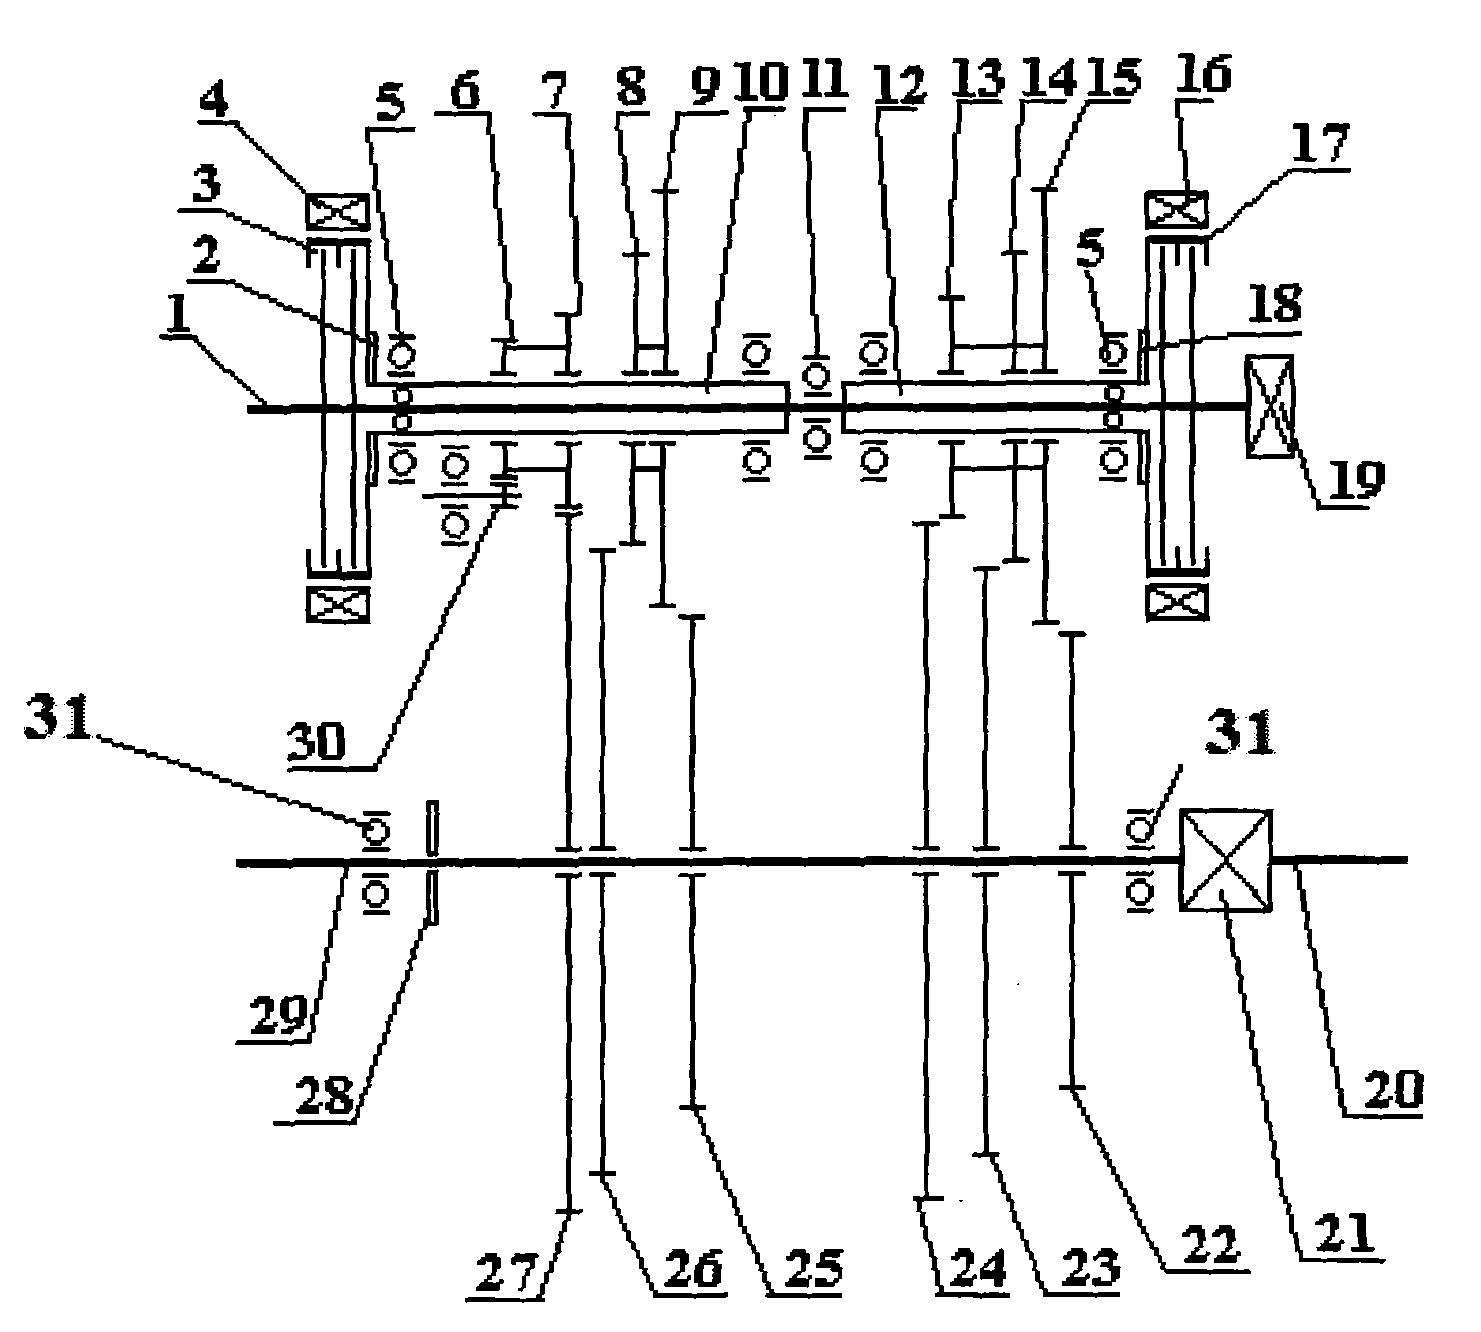 Double-clutch automatic speed changer